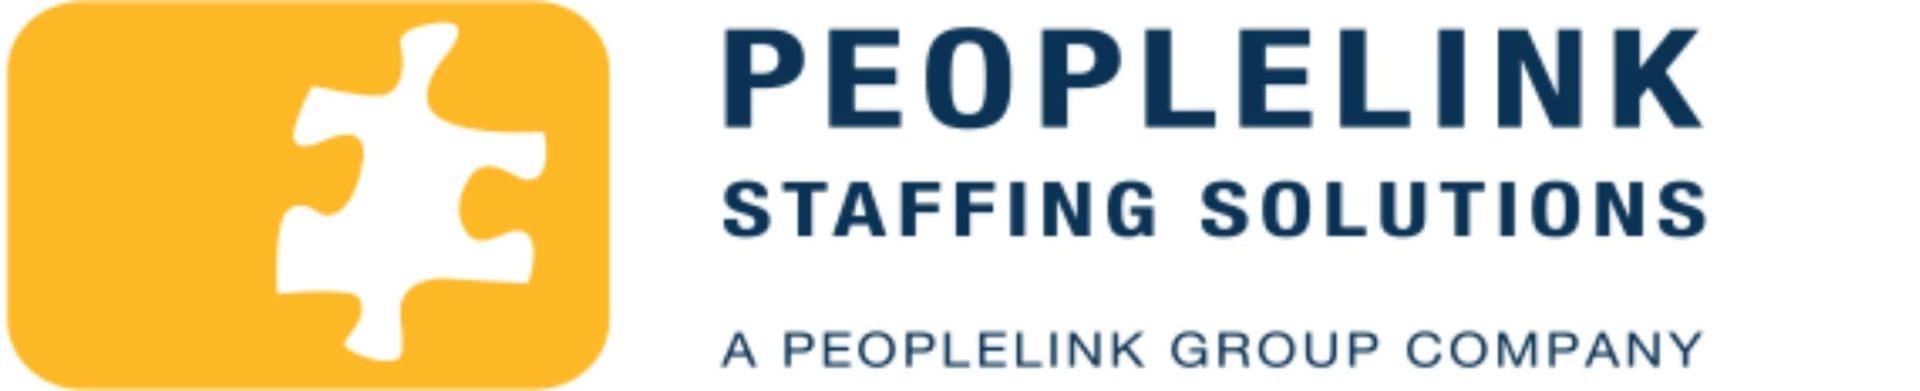 Peoplelink Staffing yellow puzzle piece logo and blue text